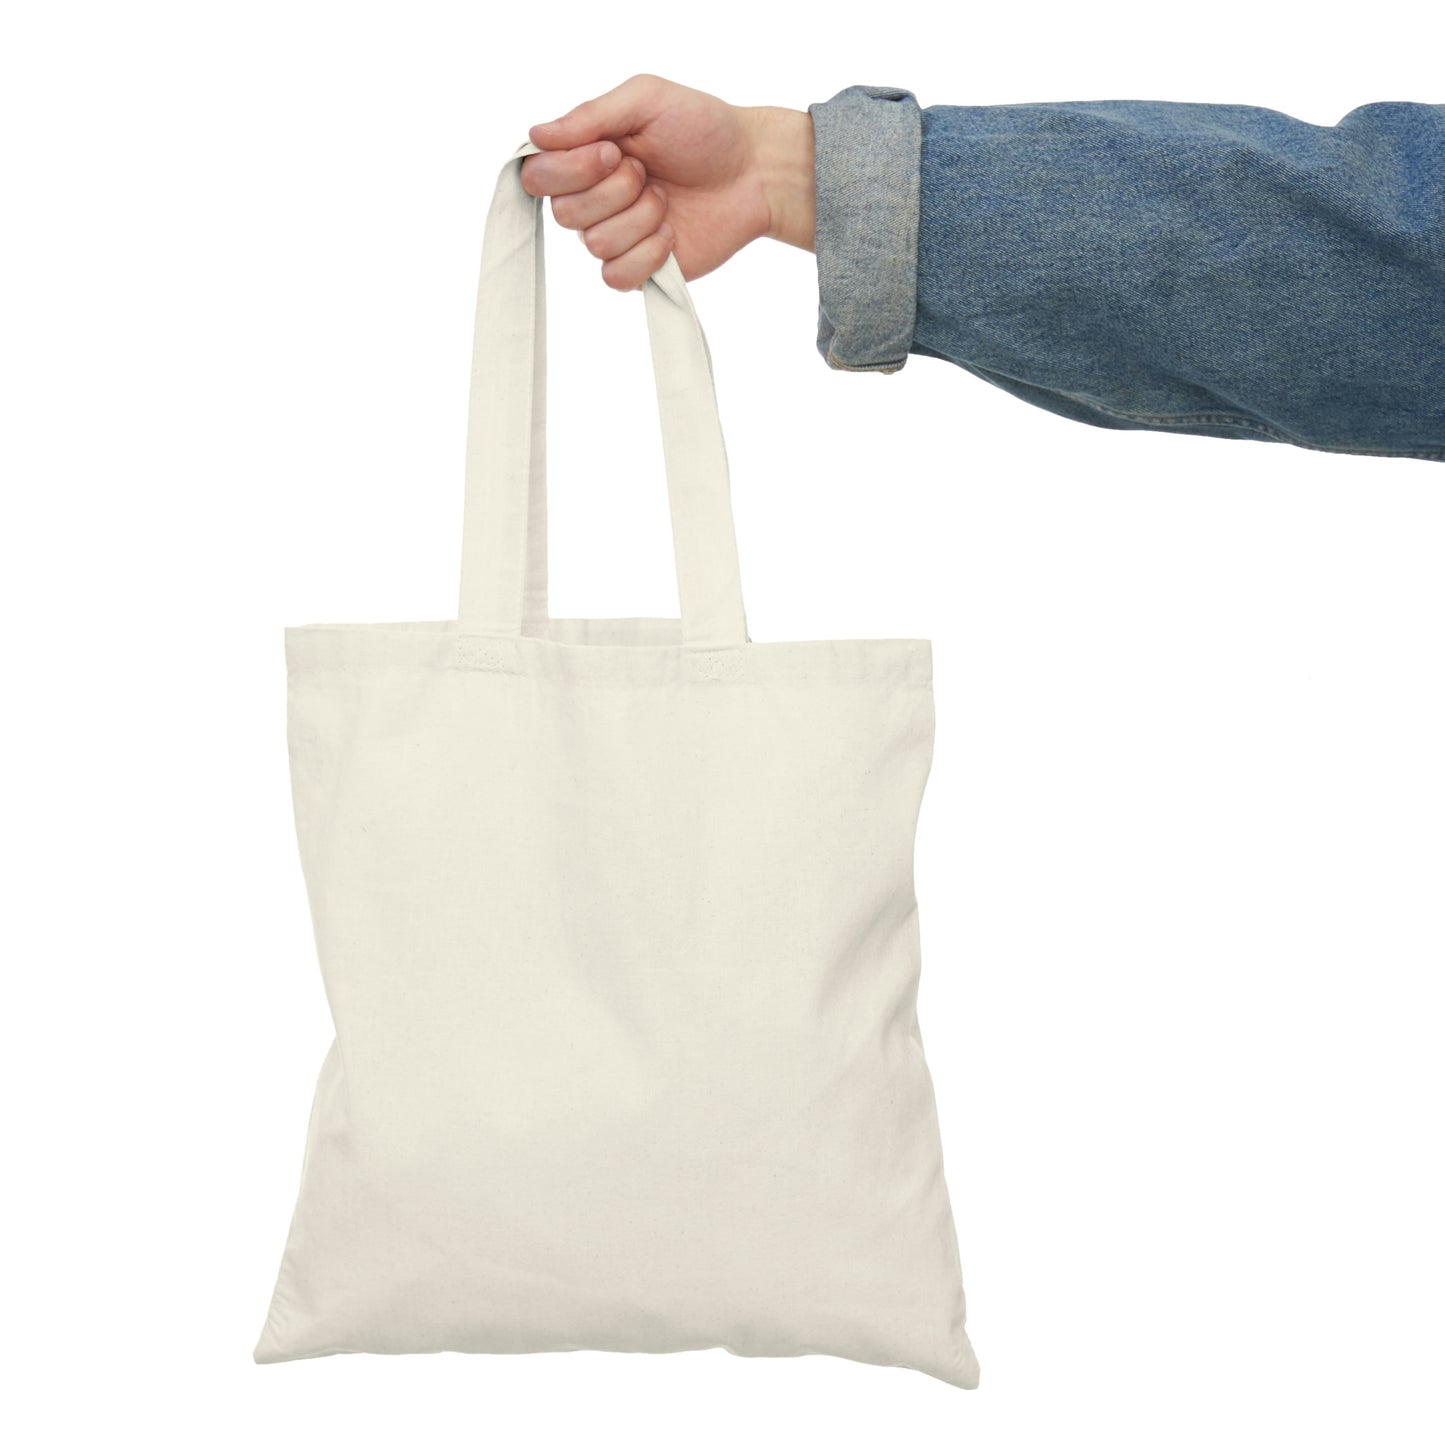 Dead Girl Found - Natural Tote Bag